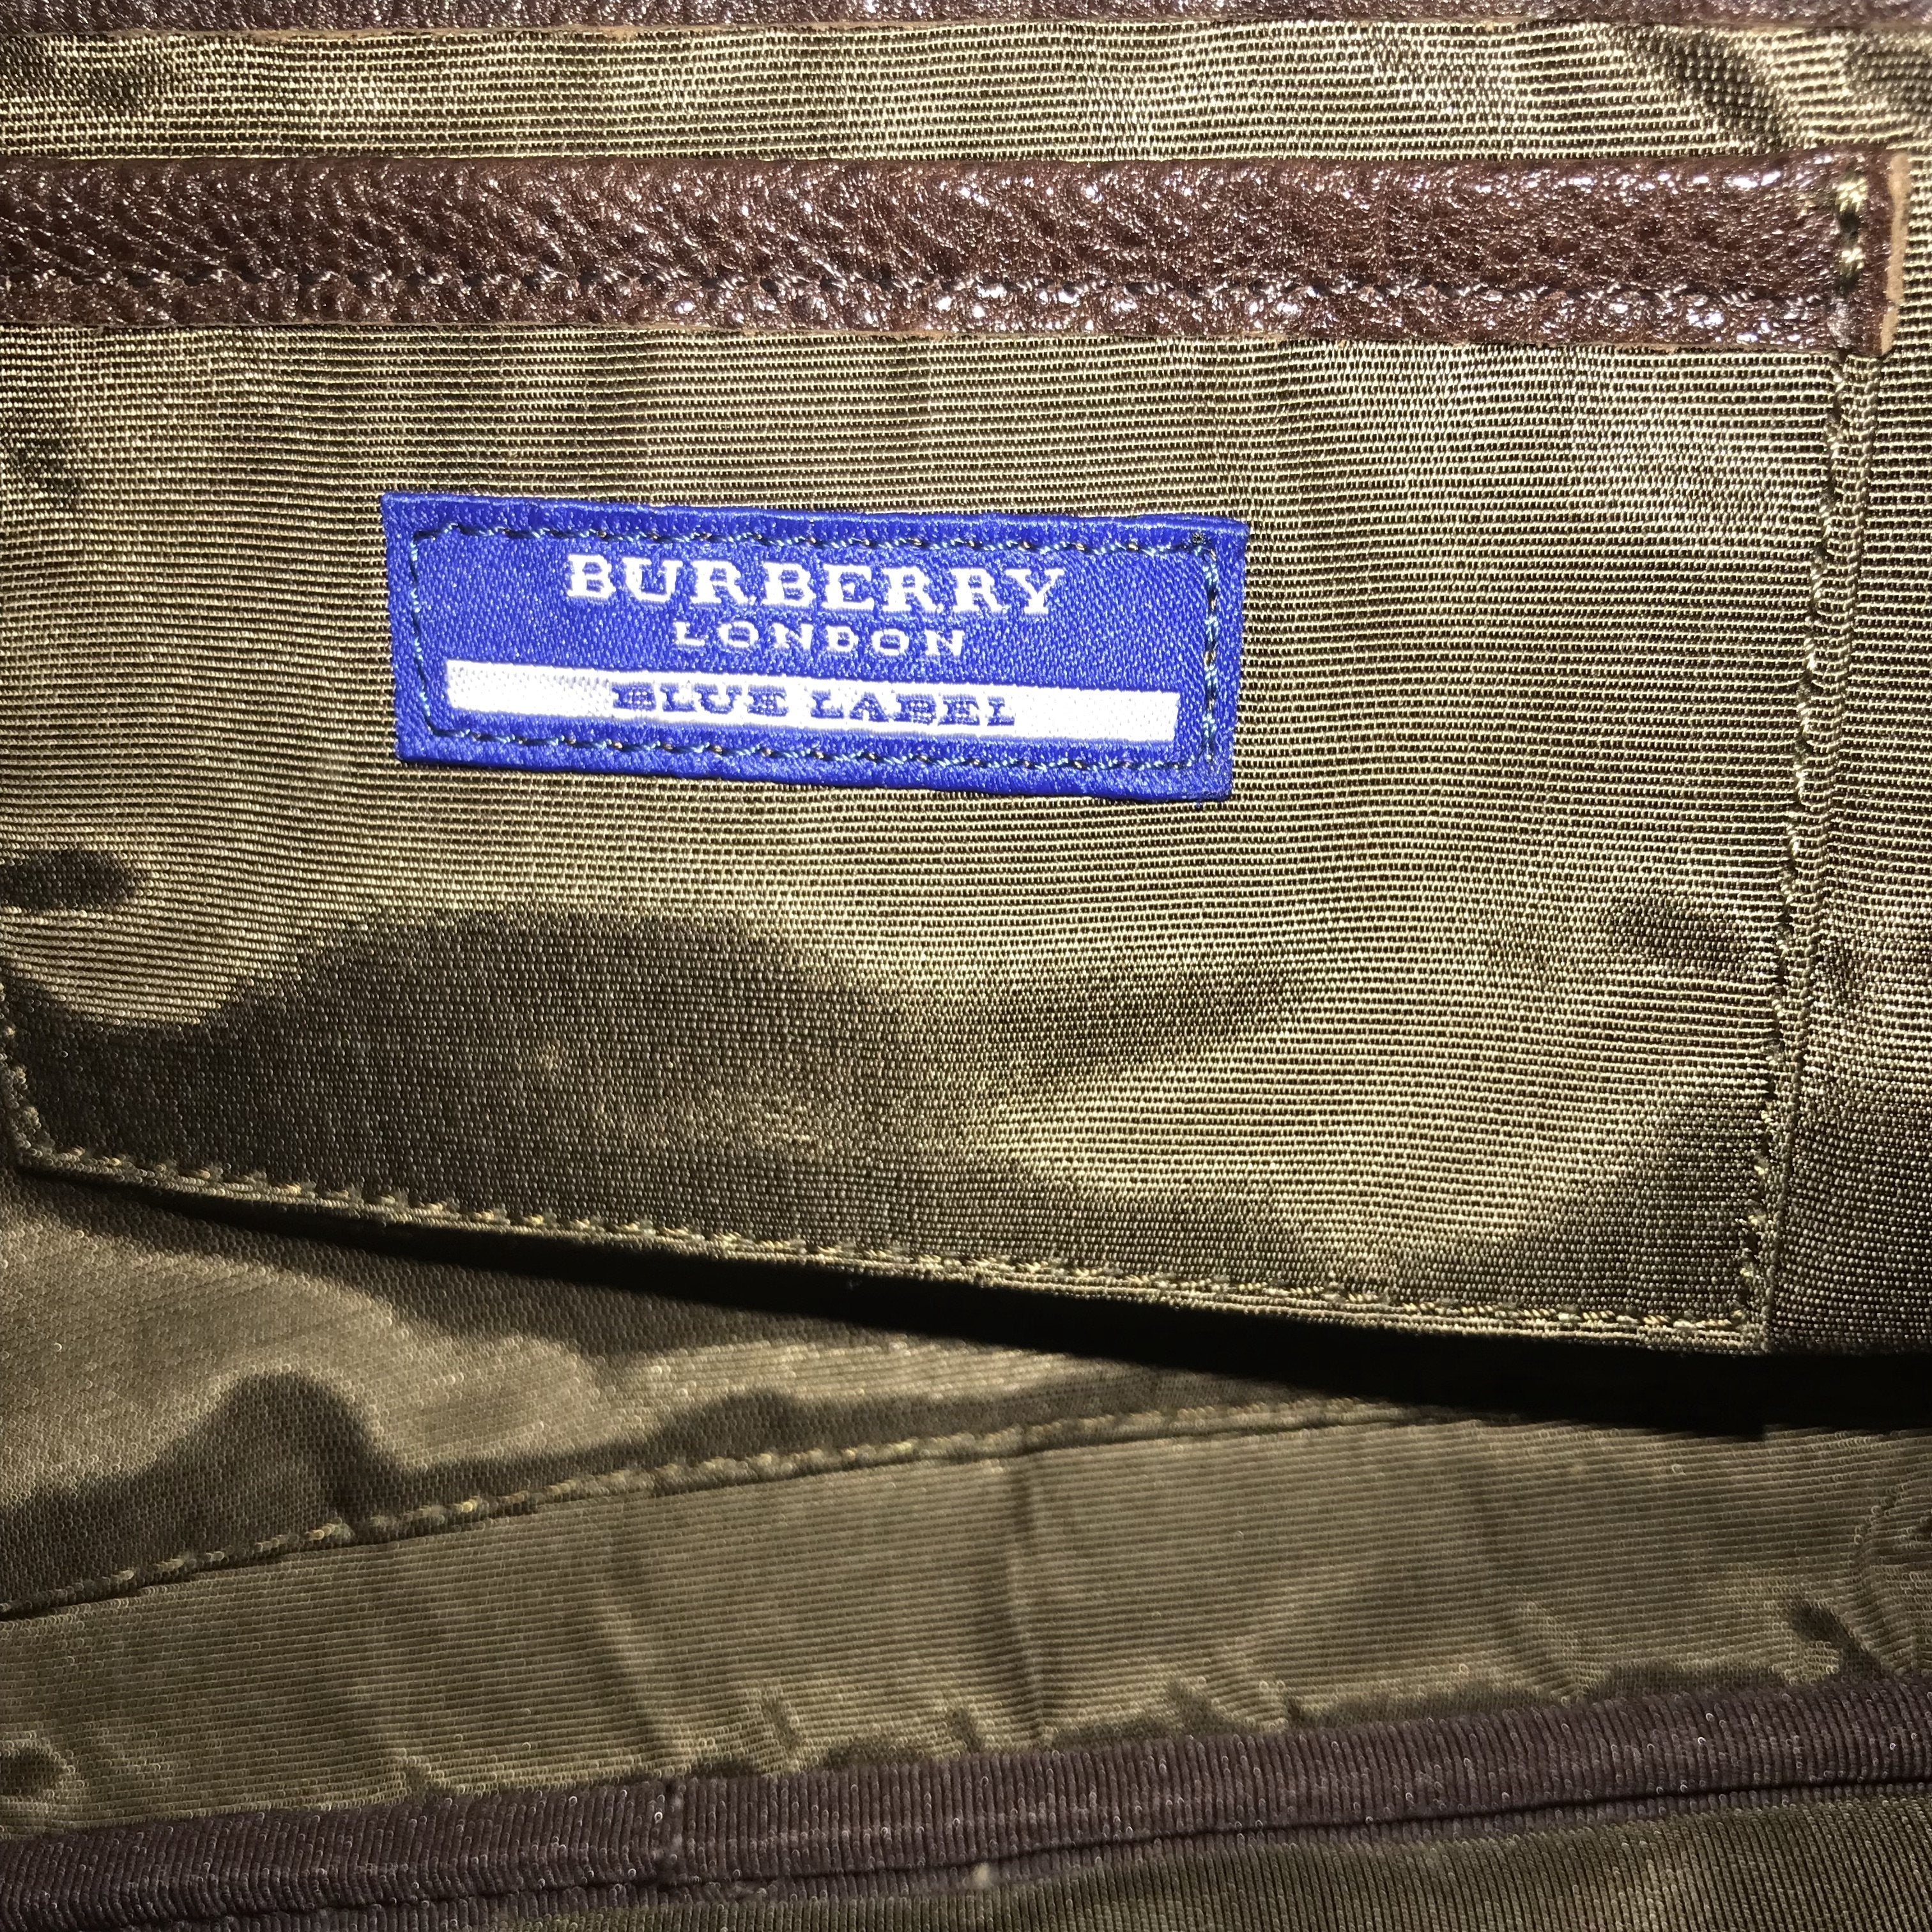 Burberry Blue Label Authentic London Pink Signature Hand Bag Small